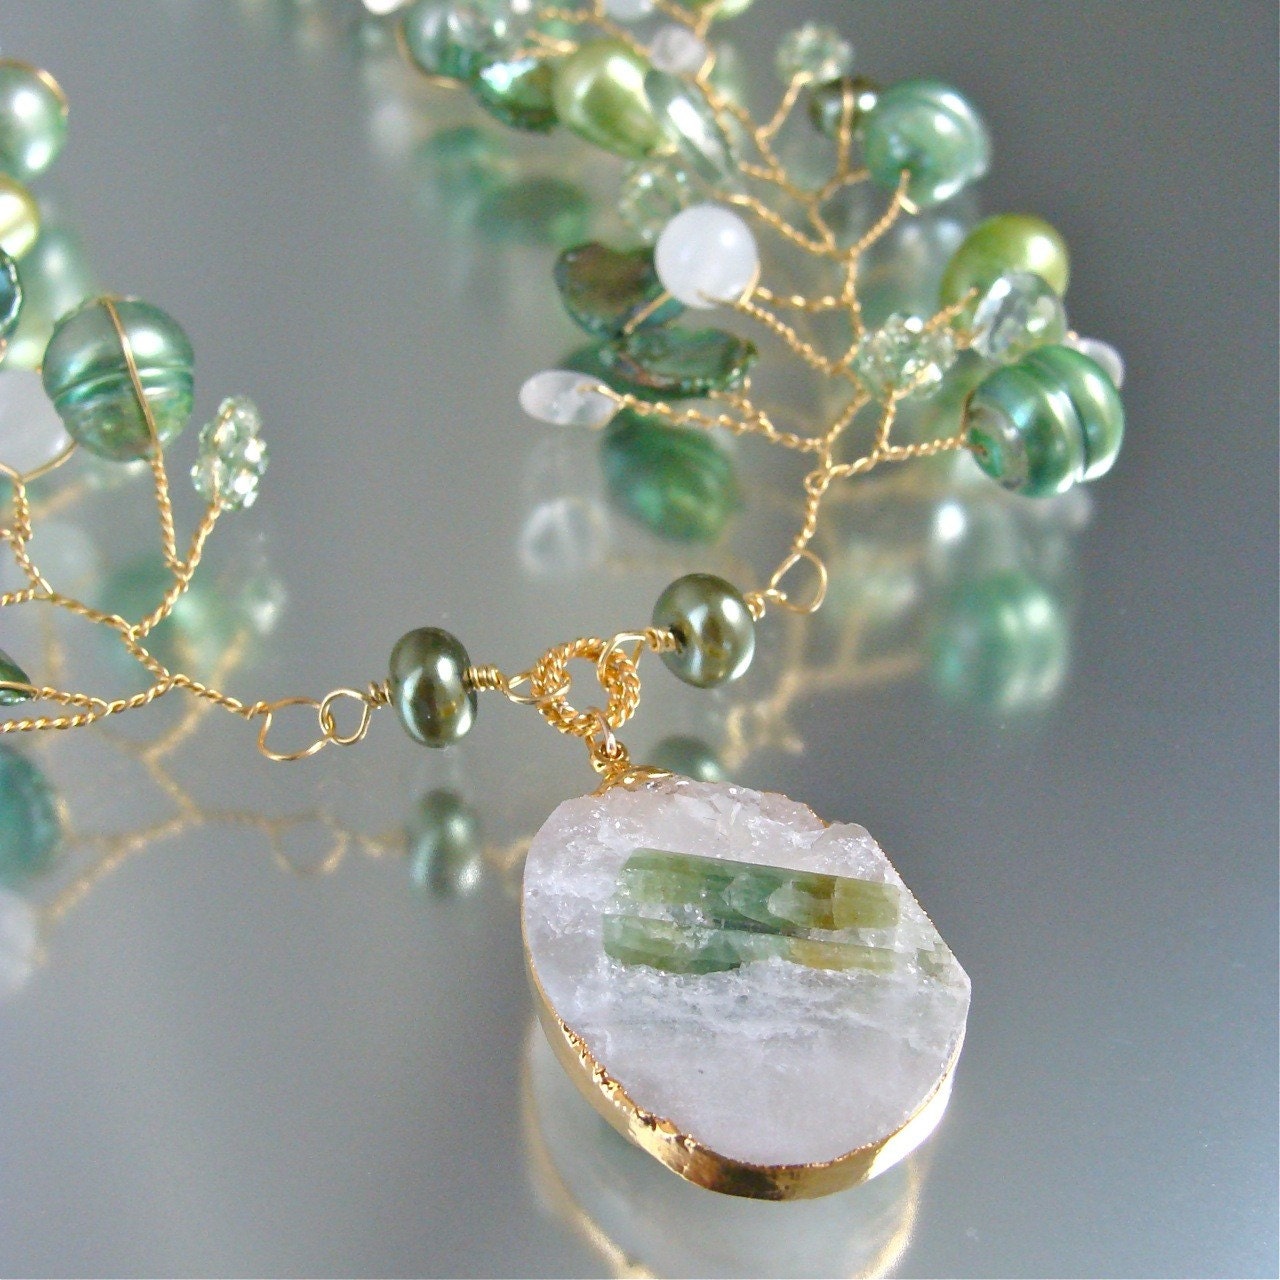 Hellebores Necklace (Flora Collection) - Freshwater Pearls, Prasiolite, Kyanite and Quartz with Green Tourmaline Crystal Pendant